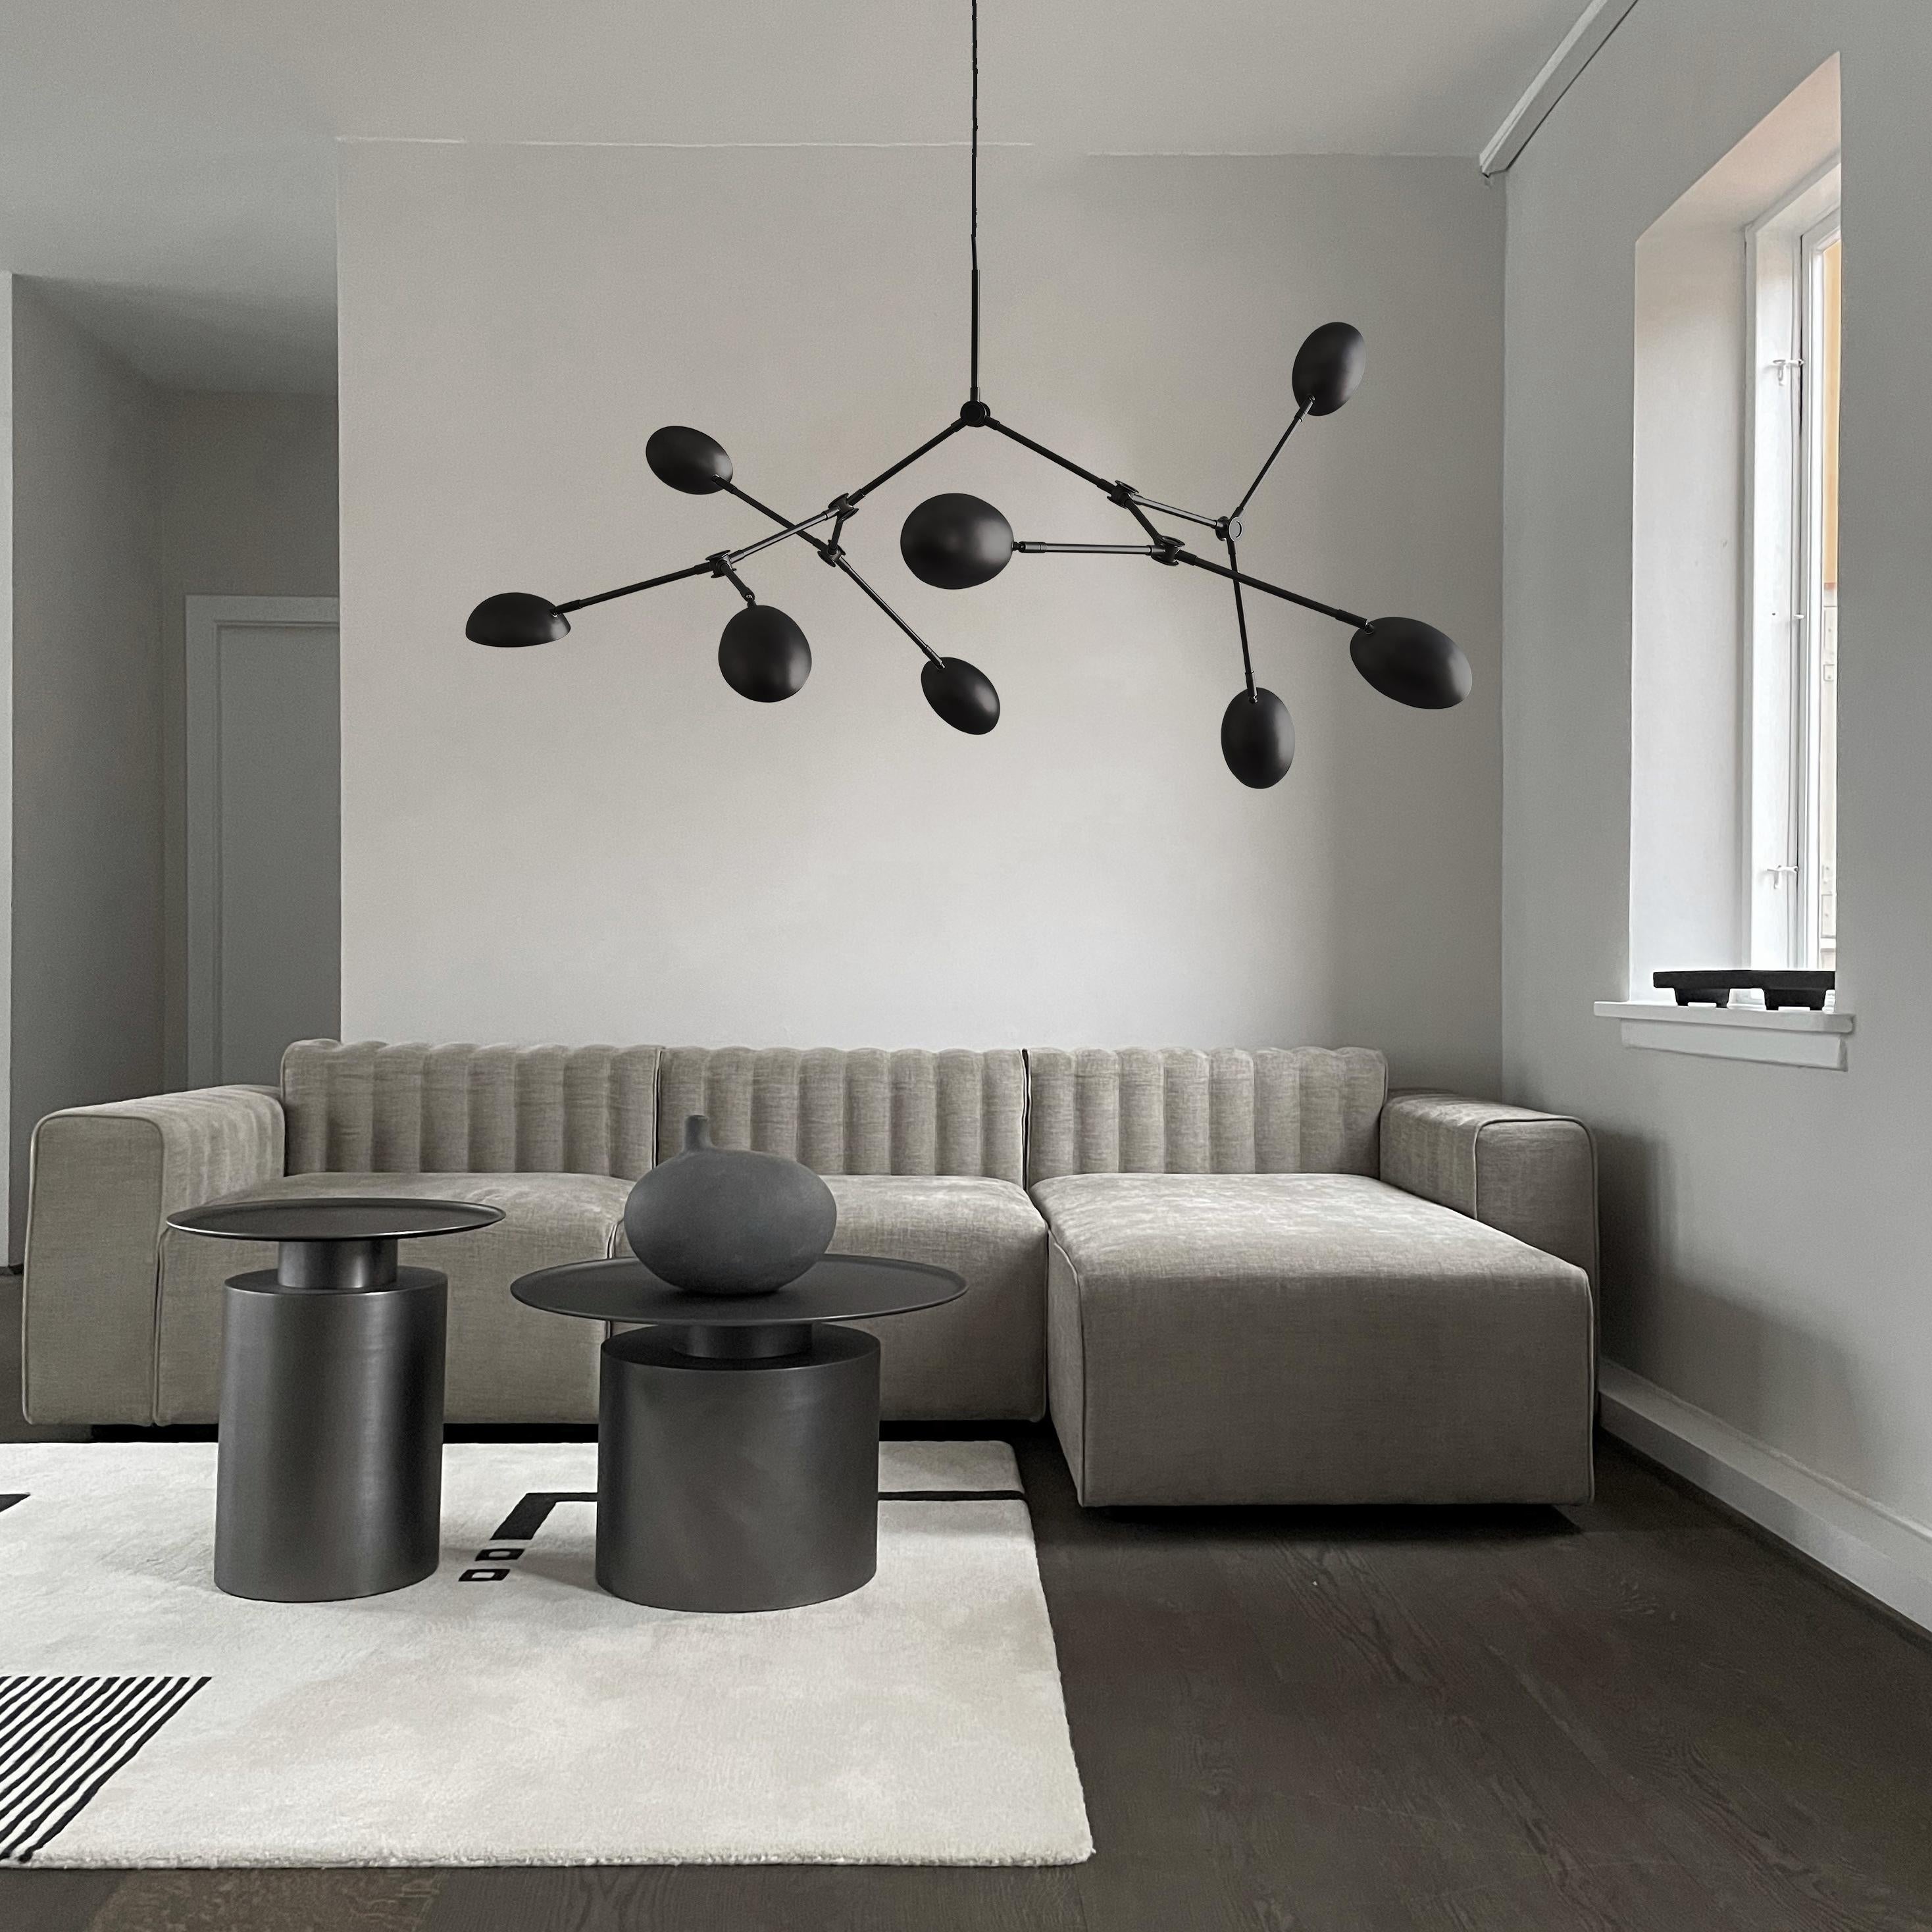 Mini Drop Chandelier Oxidized Metal by 101 Copenhagen
Designed by Kristian Sofus Hansen & Tommy Hyldahl.
Dimensions: L100 x W95 x H95 cm
Materials: Lampshade: Oxidized Aluminium
Pipes: Brass Oxidized / Unpolished
Cable: Fabric covered cable /